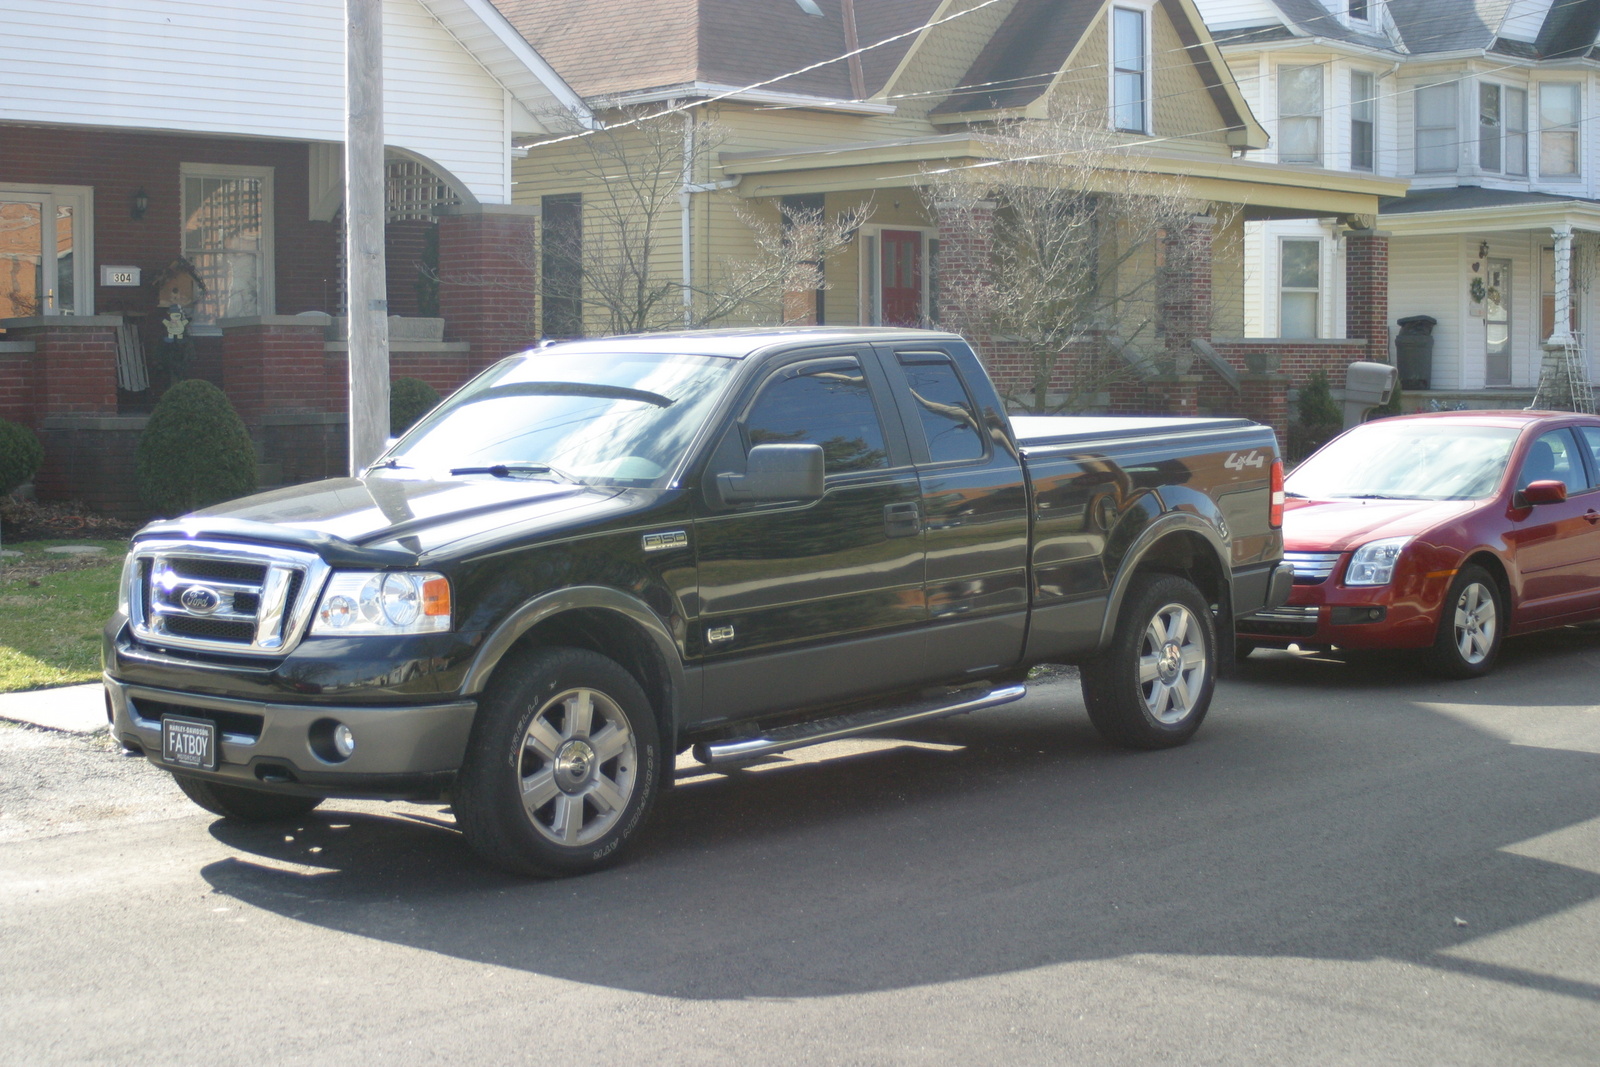 2008 Ford lariat limited review #1